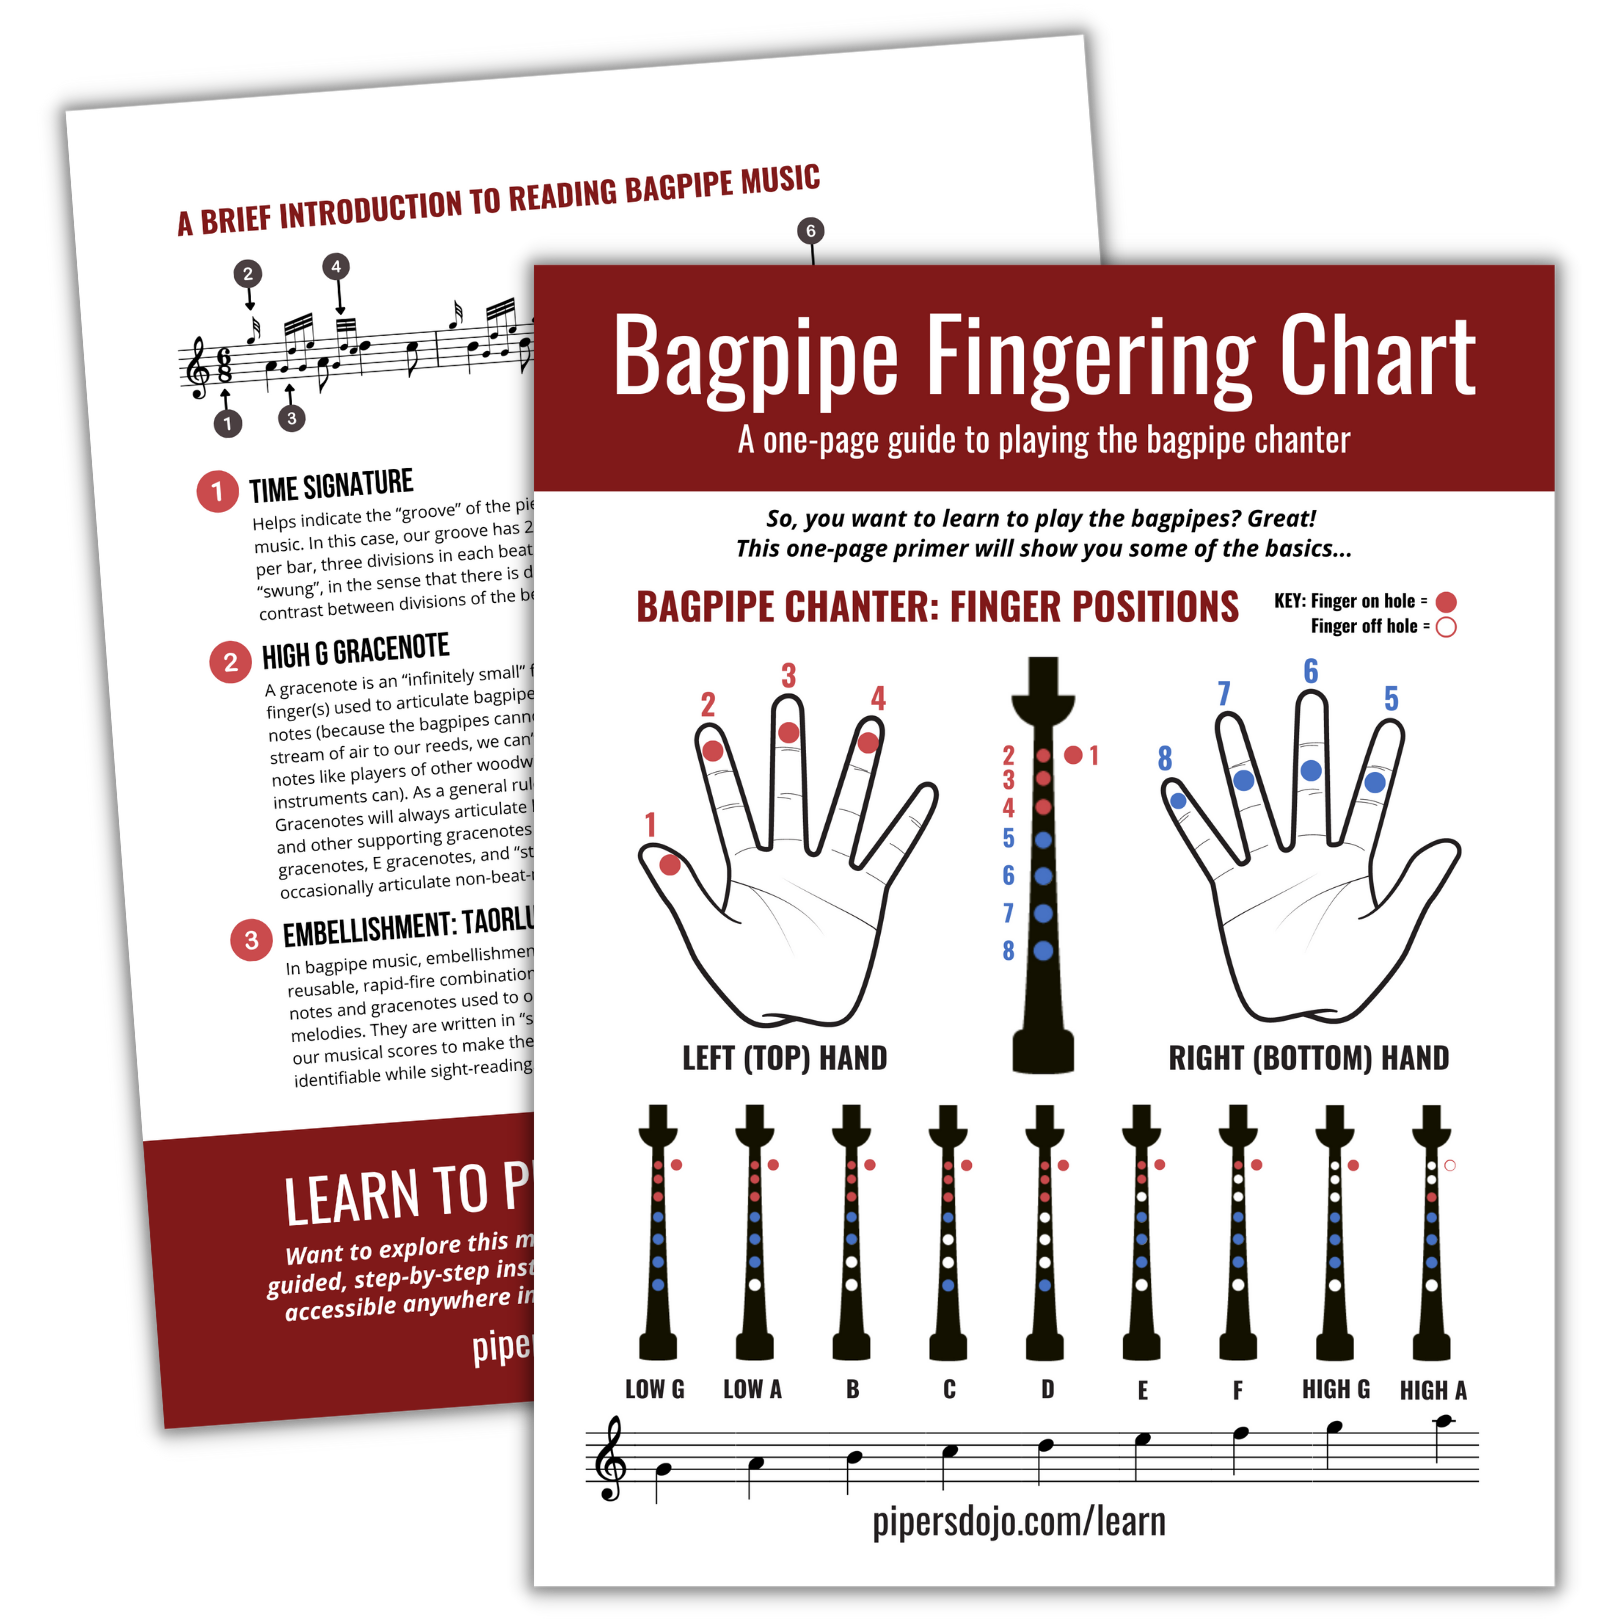 Bagpipe Fingering Chart